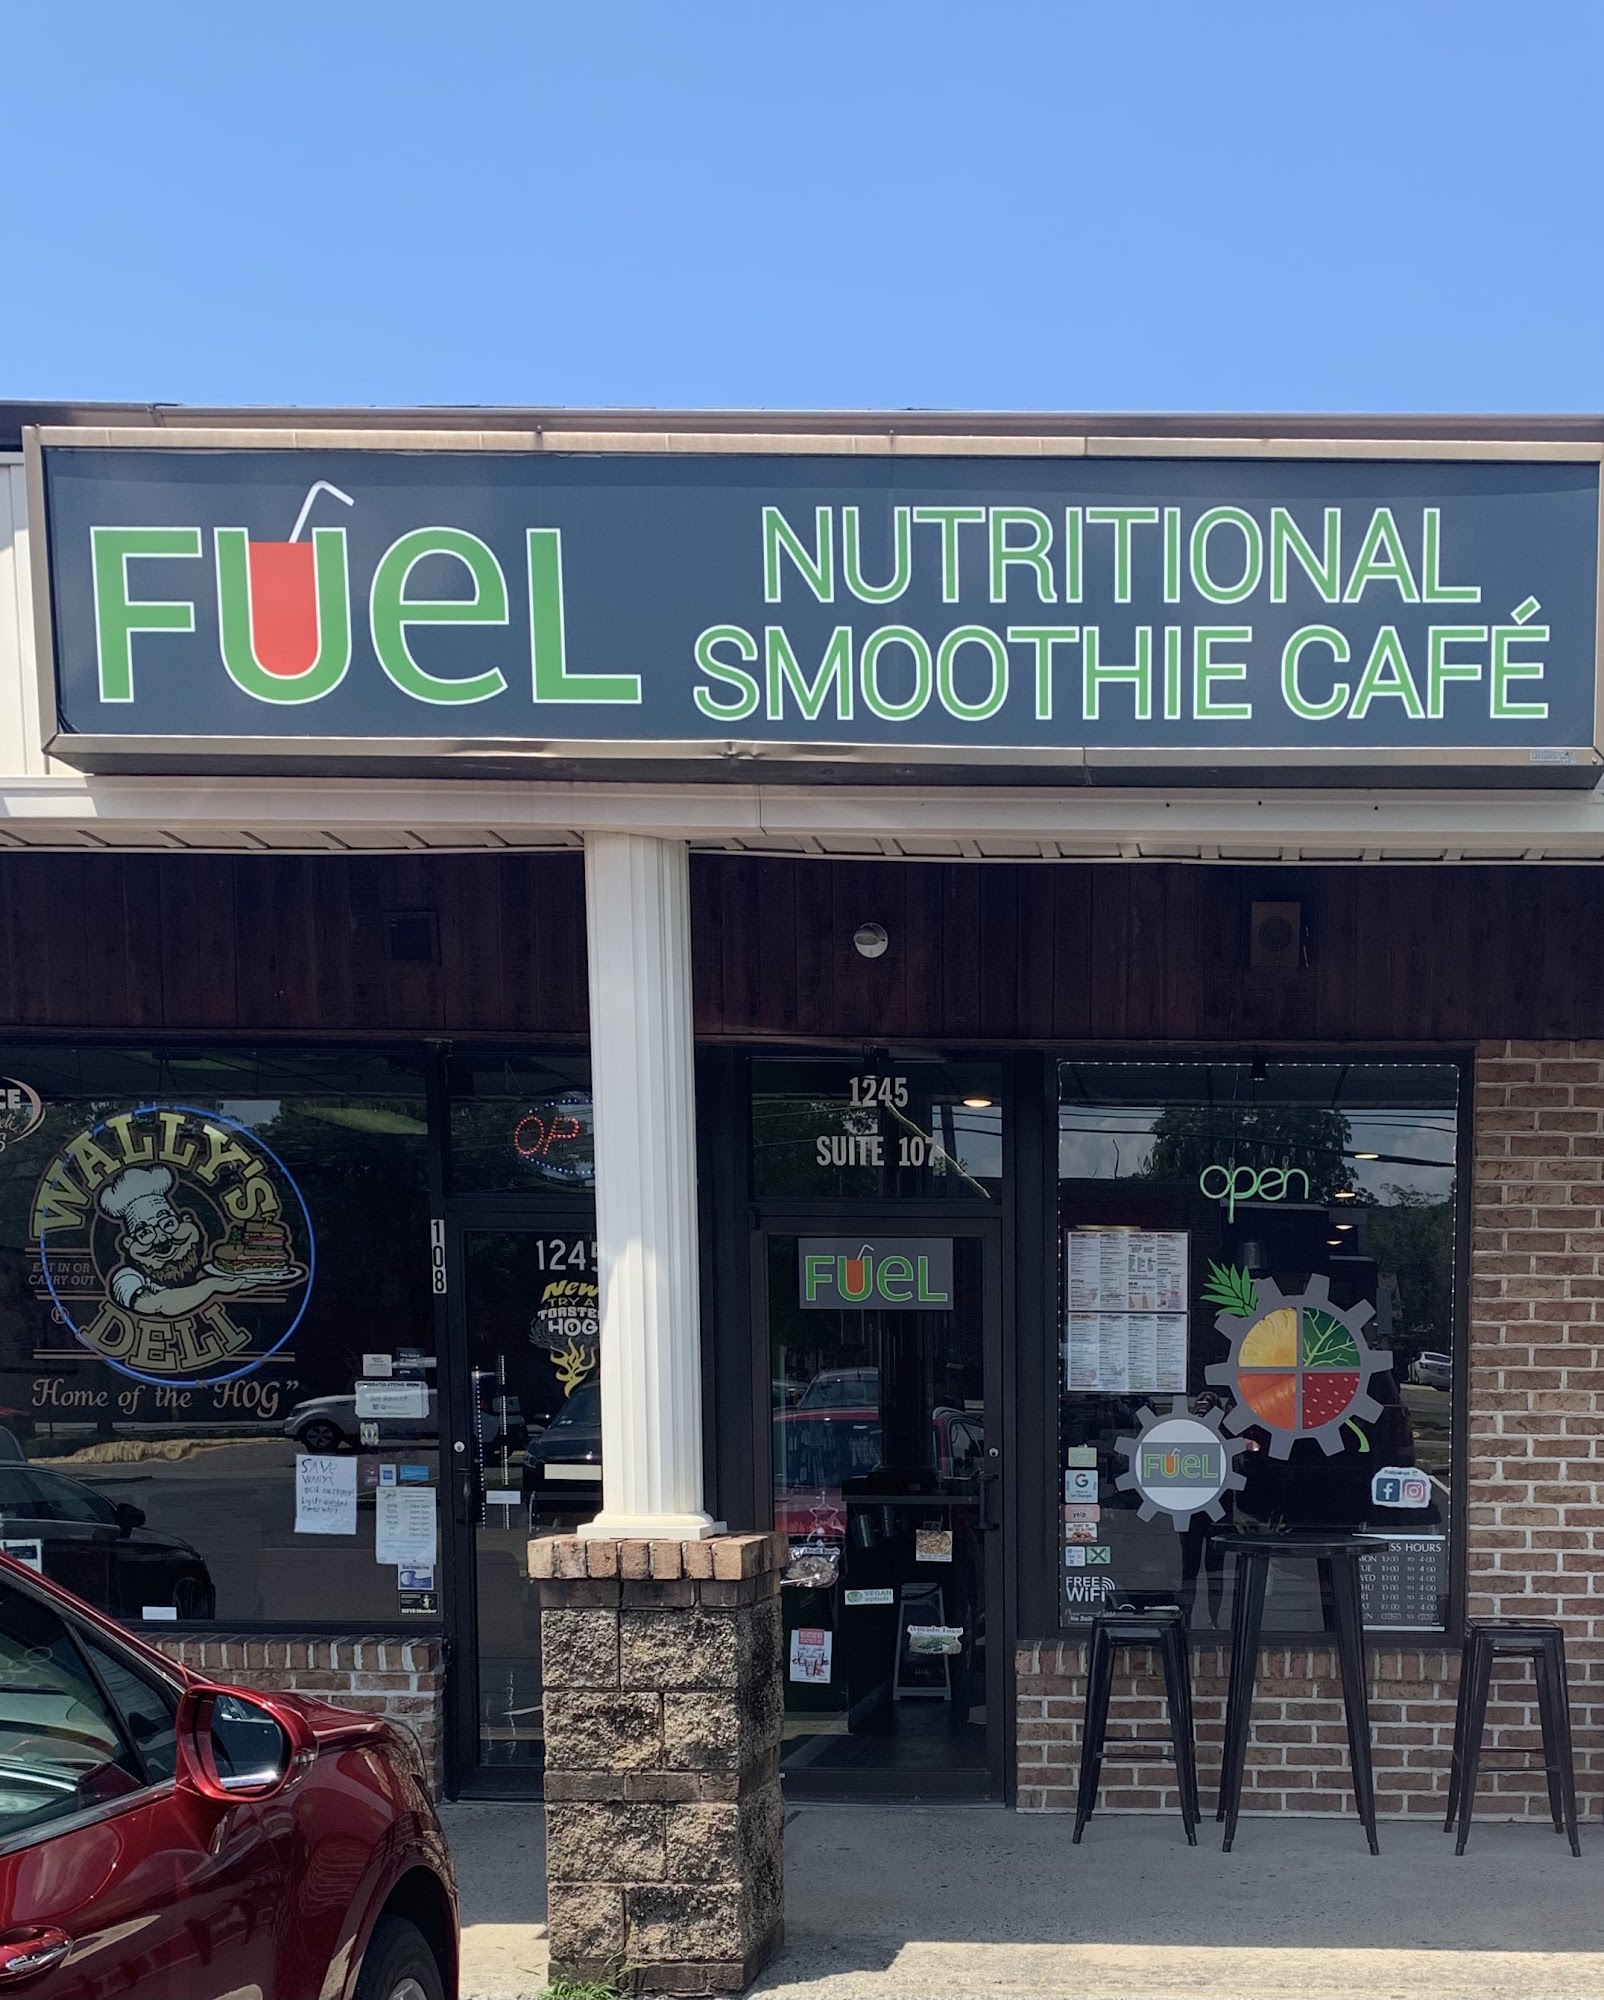 Fuel Nutritional Smoothie Cafe’